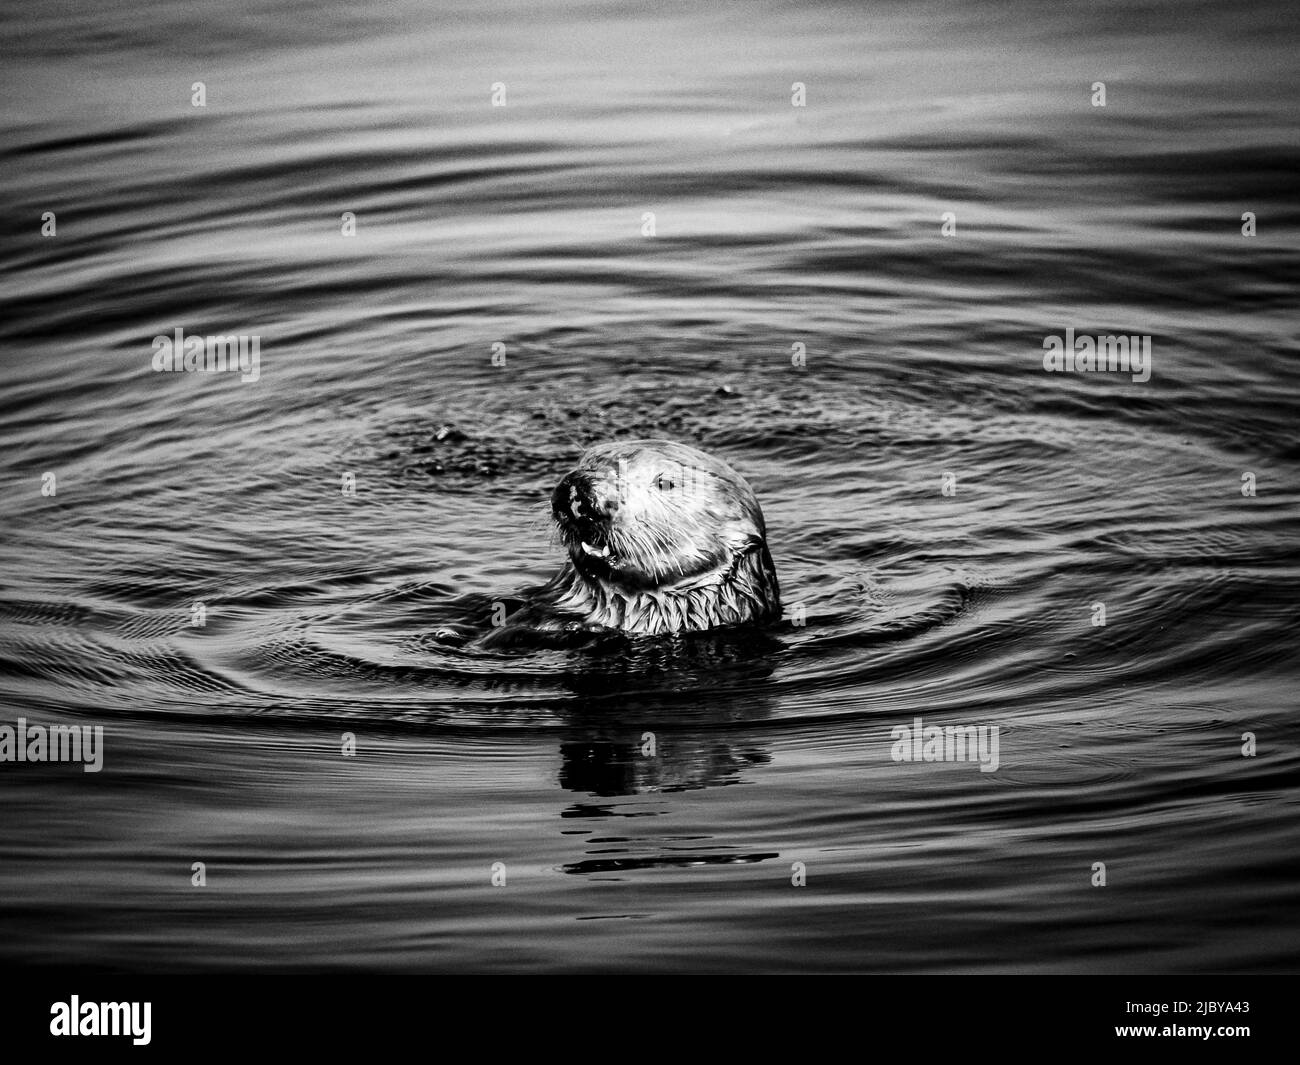 Black and White, Curious Southern Sea Otter (Enhydra lutris) in Montrey Bay boat harbor, Monterey, California Stock Photo